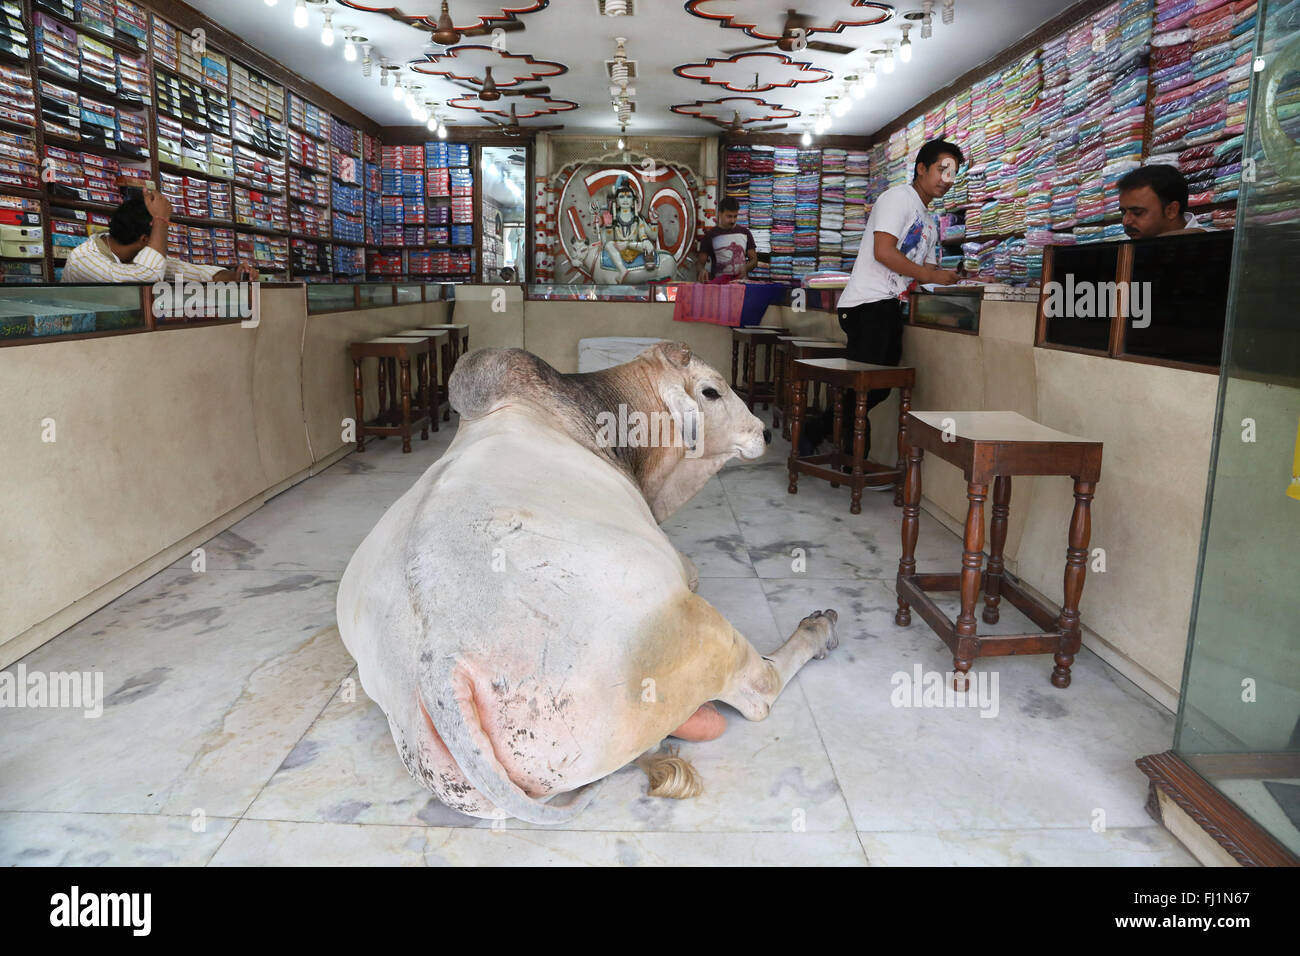 A huge bull lays inside a Silk shop in Varanasi , India - totally unusual outstanding scene - Incredible India ! Stock Photo